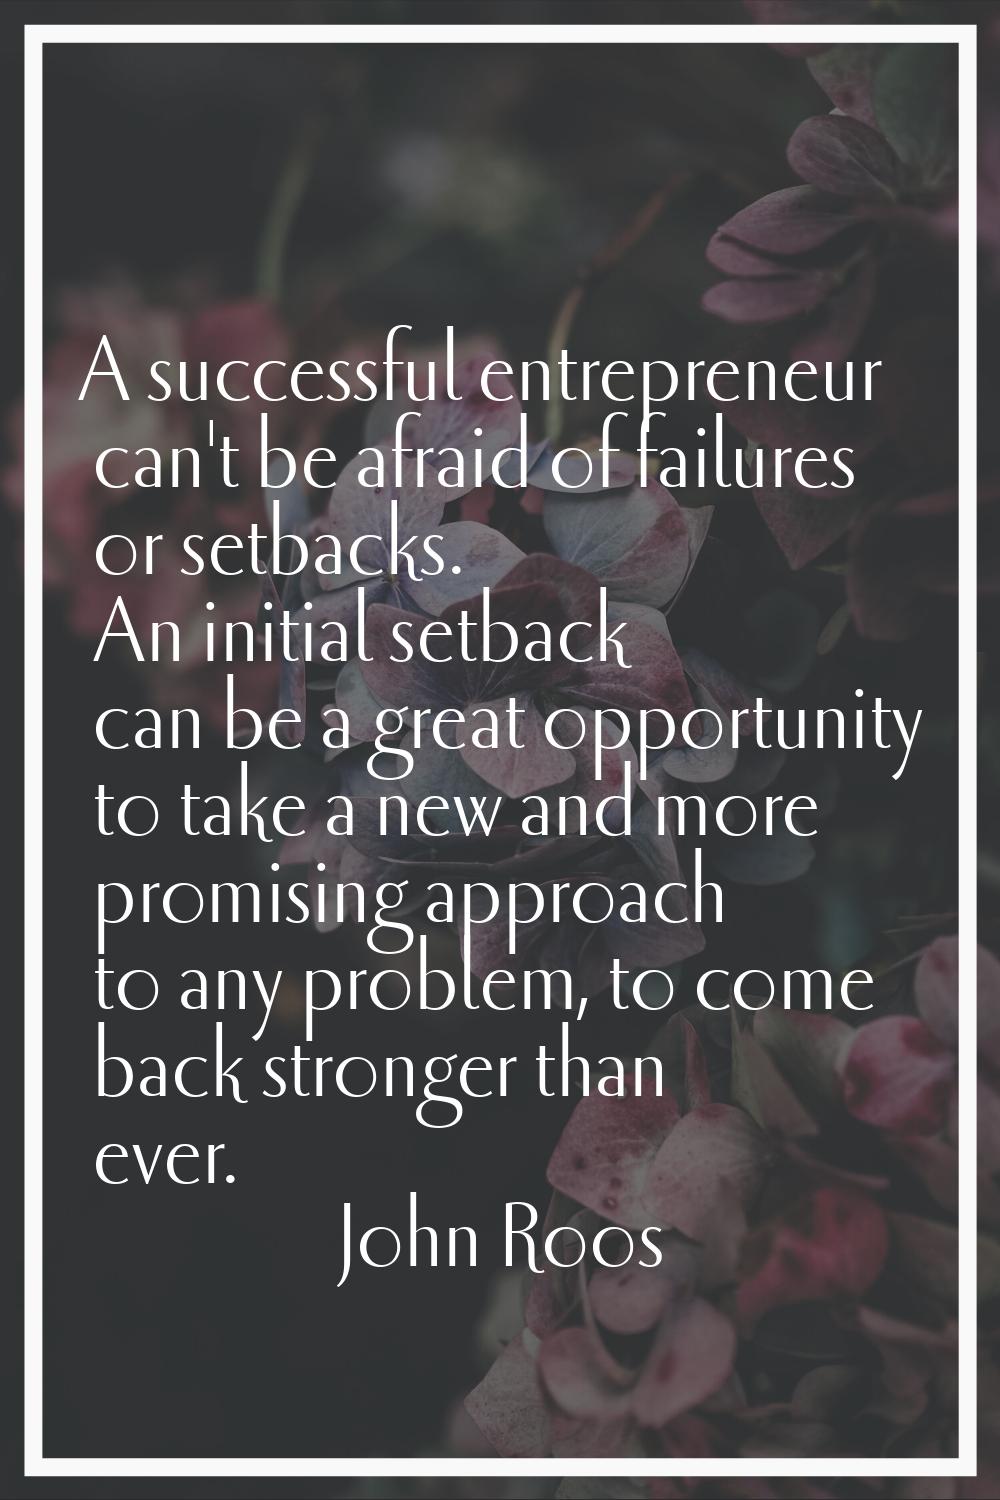 A successful entrepreneur can't be afraid of failures or setbacks. An initial setback can be a grea